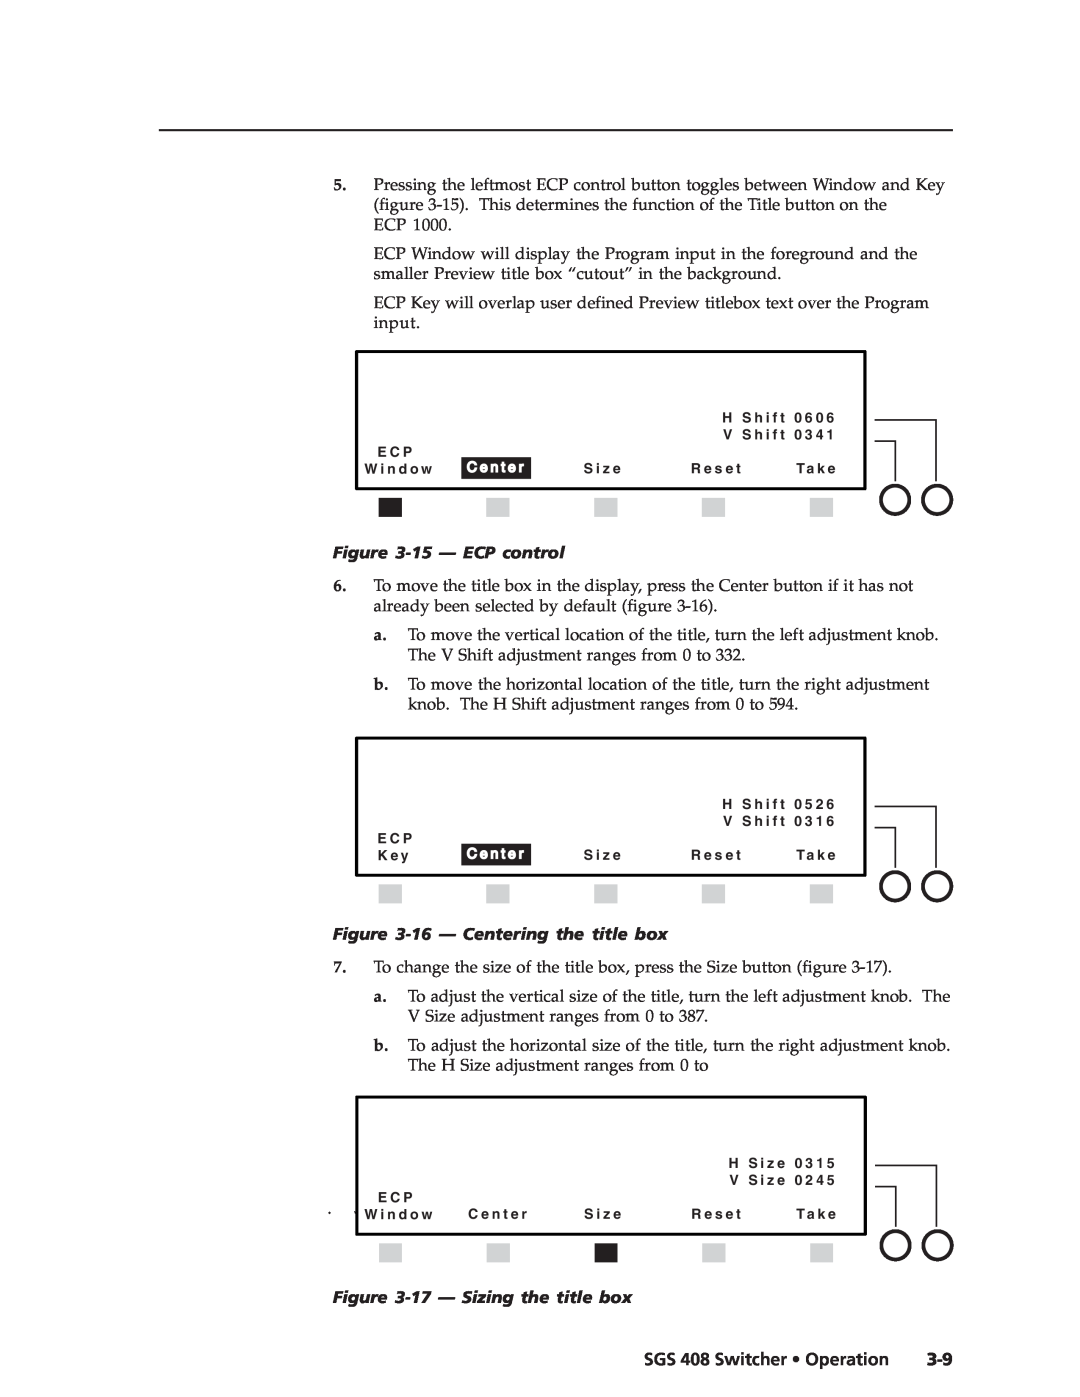 Extron electronic SGS 408 manual 15 - ECP control, 16 - Centering the title box, 17 - Sizing the title box 